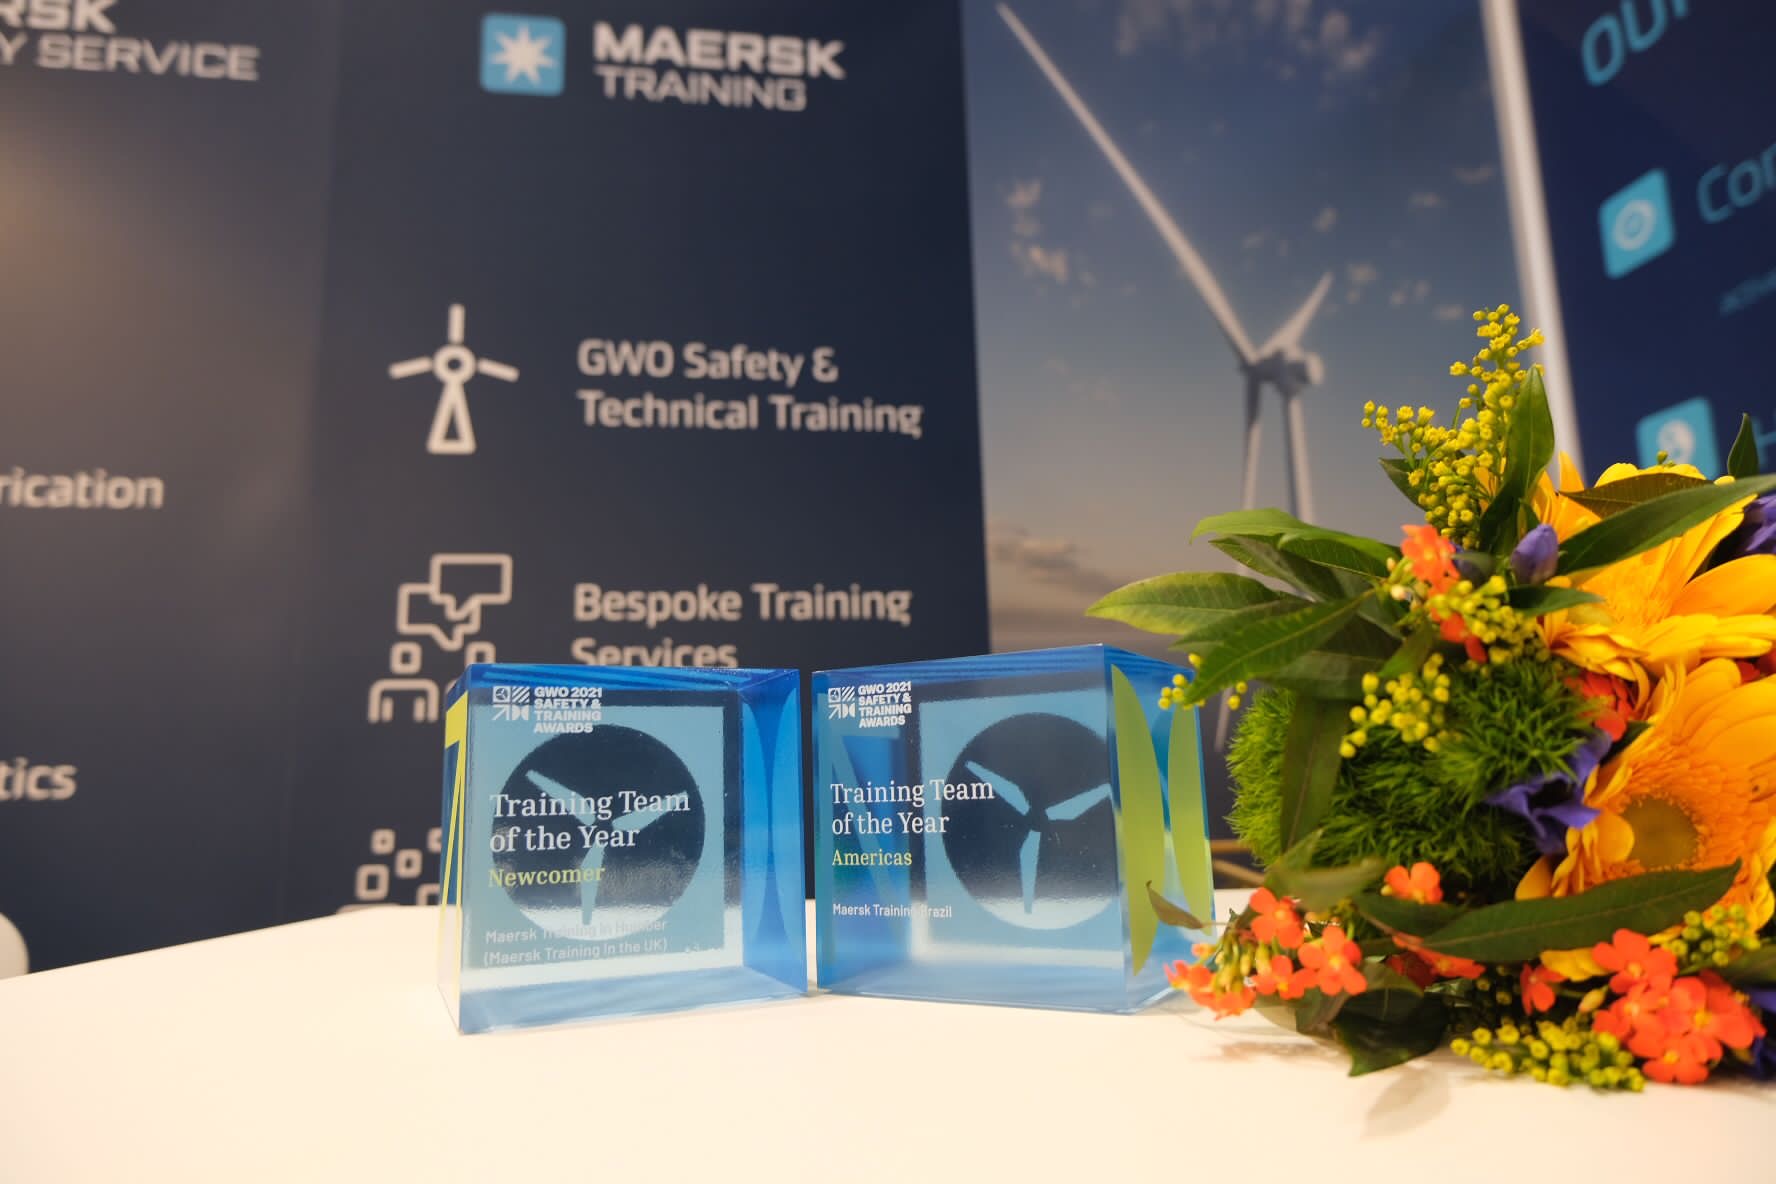 Maersk Training wins two coveted safety and training awards at newly launched Global Wind Organisation award ceremony